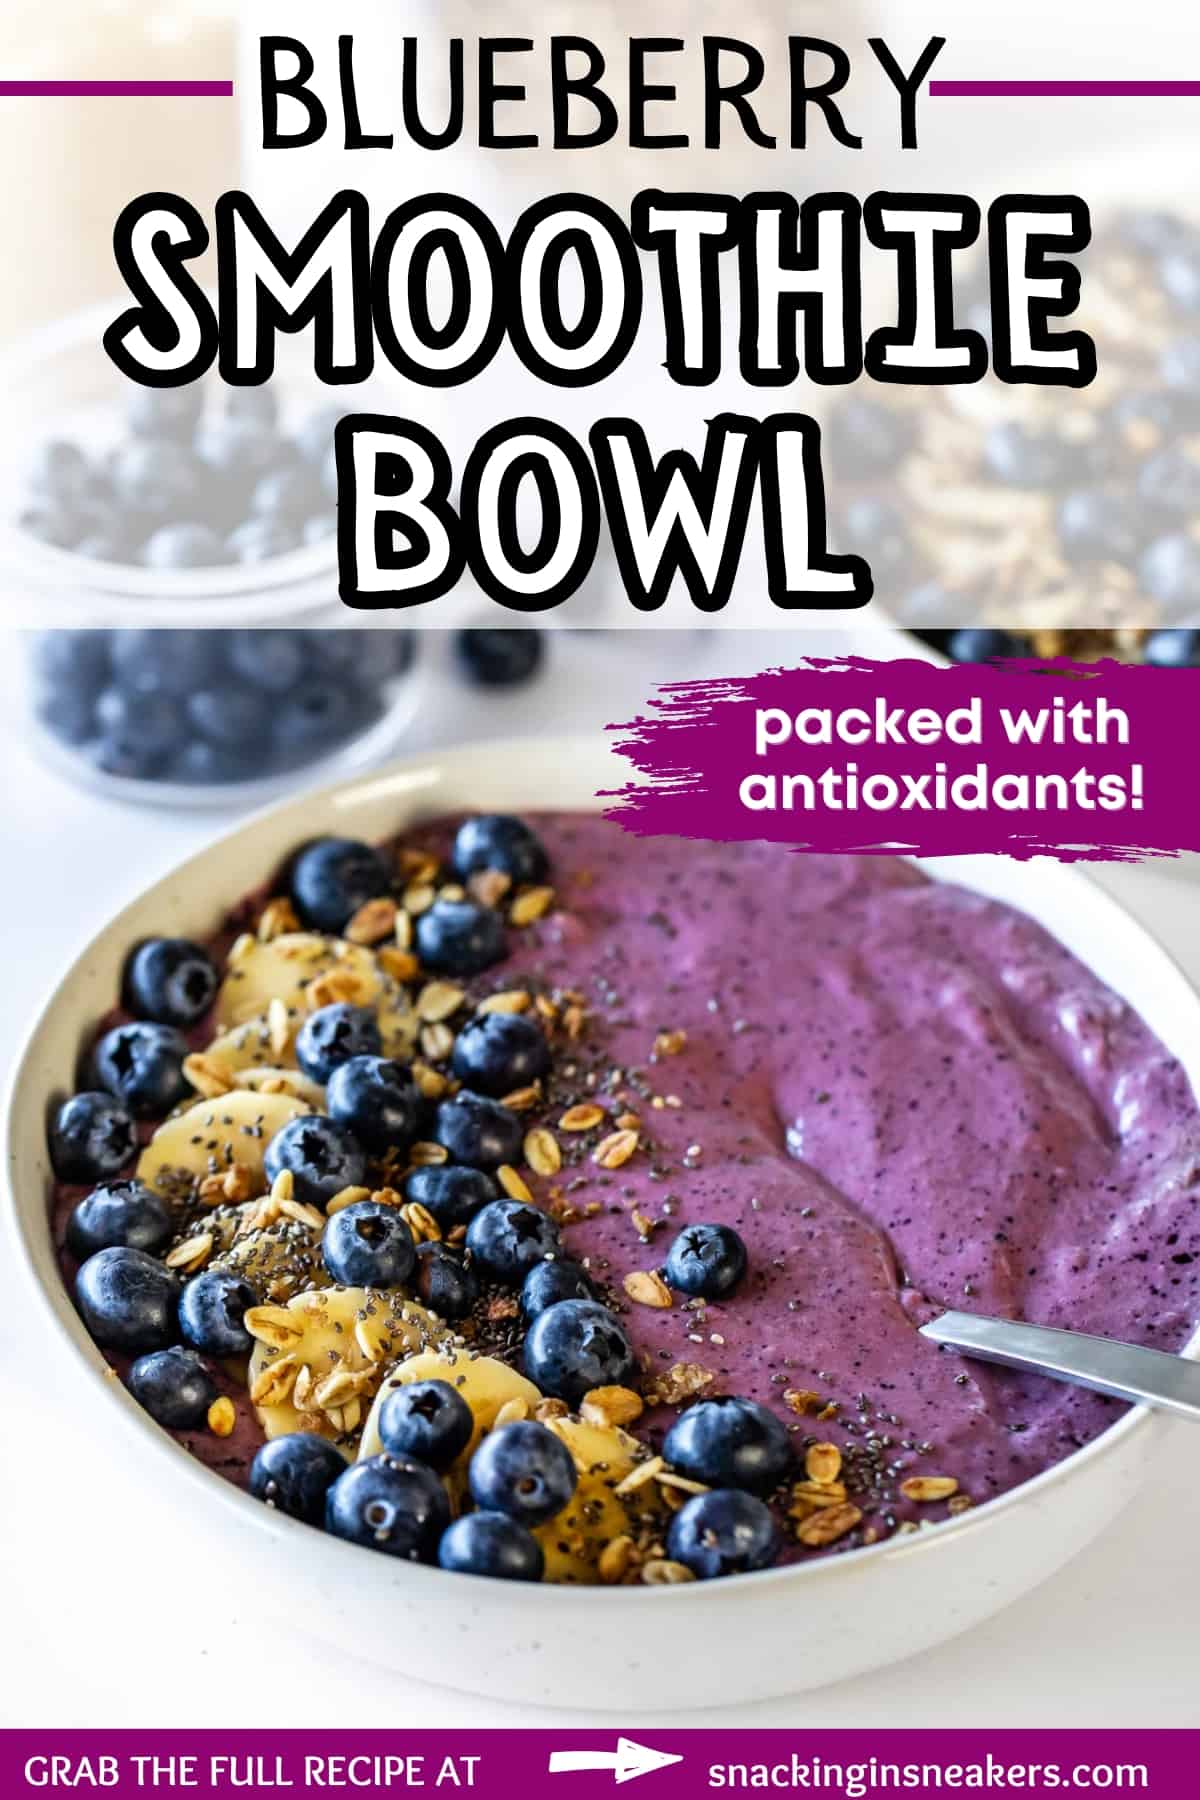 A blueberry smoothie bowl with a text overlay with the name of the recipe.